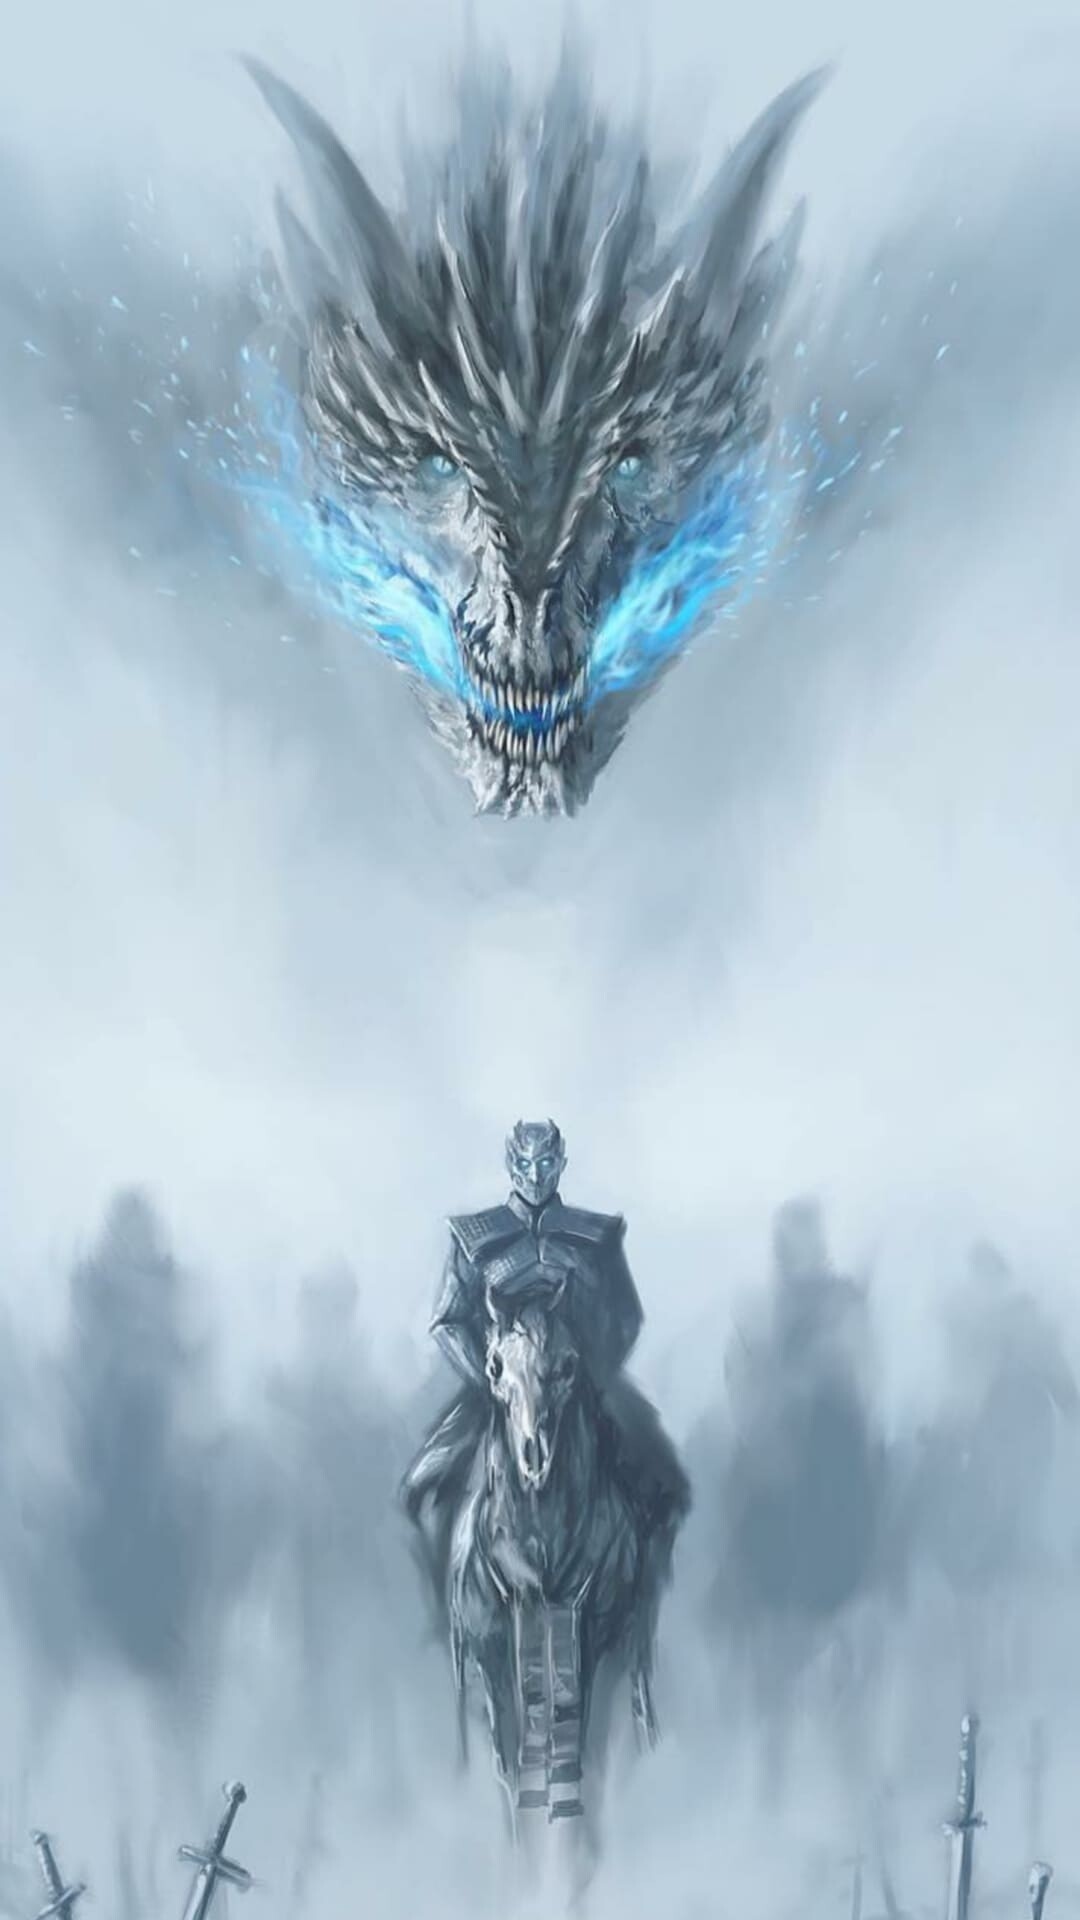 Game of Thrones: David Benioff and D. B. Weiss have directed two episodes together. 1080x1920 Full HD Background.